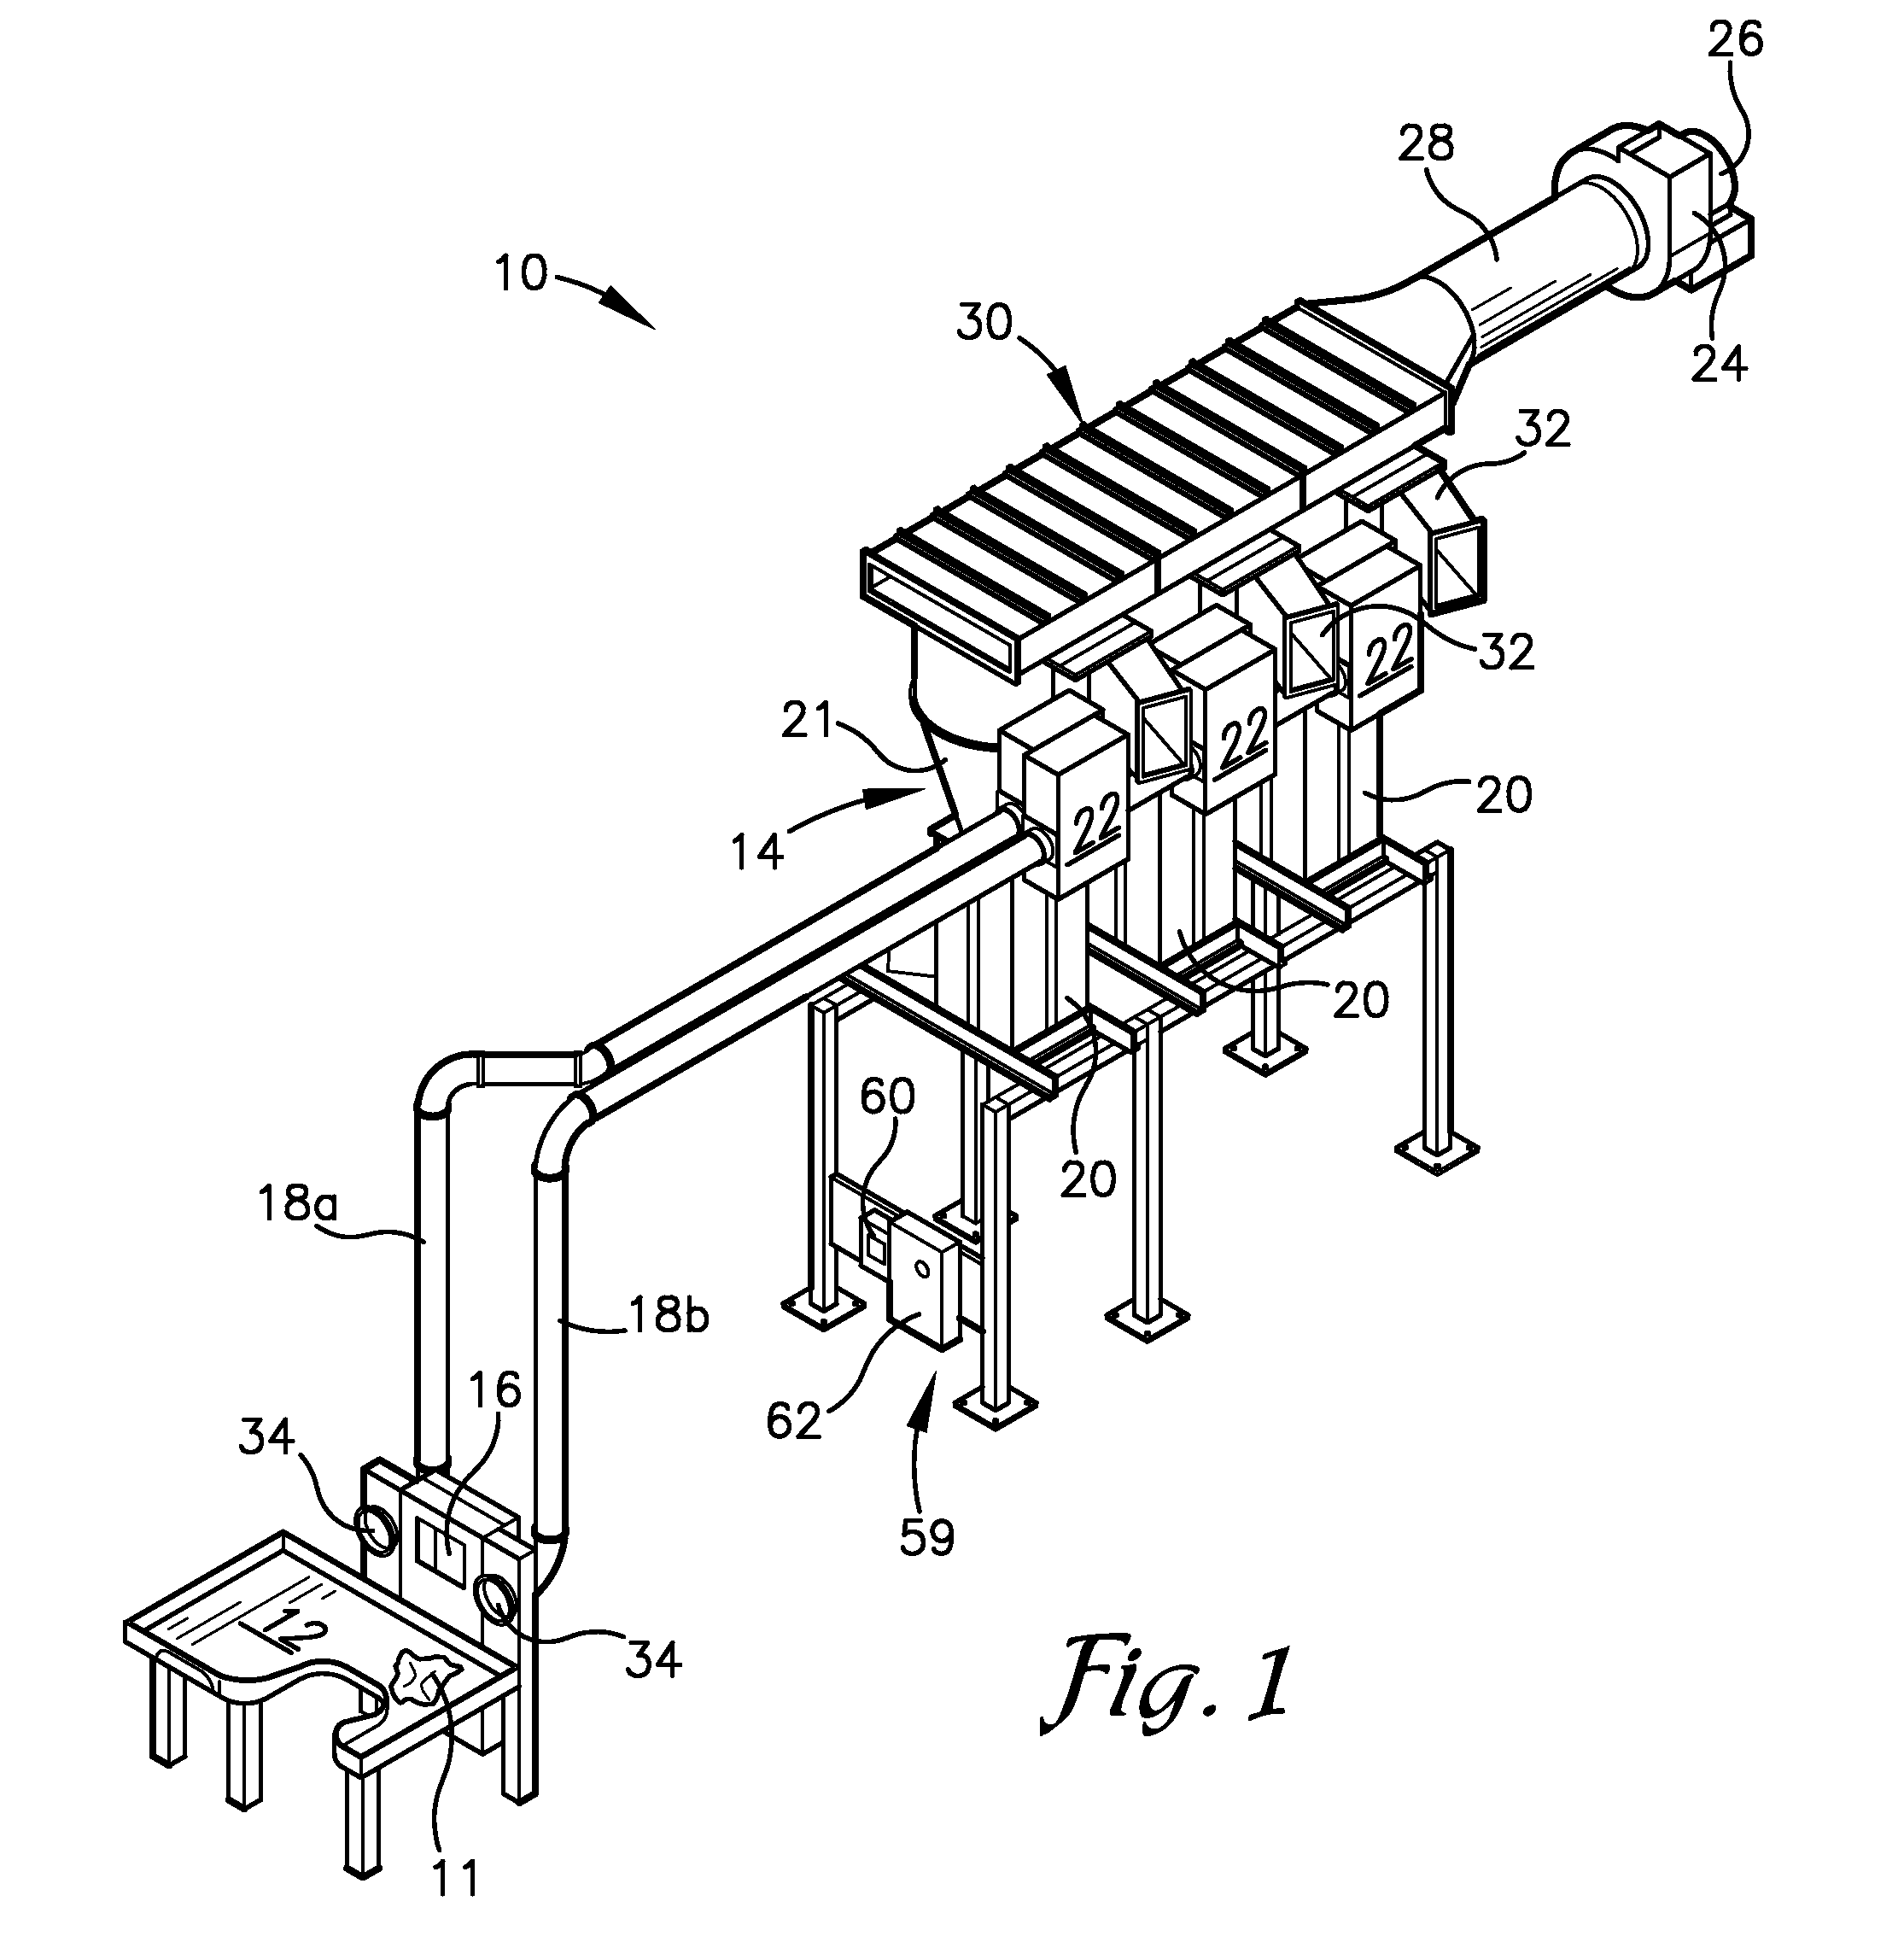 Apparatus for textile counting, sorting and classifying system